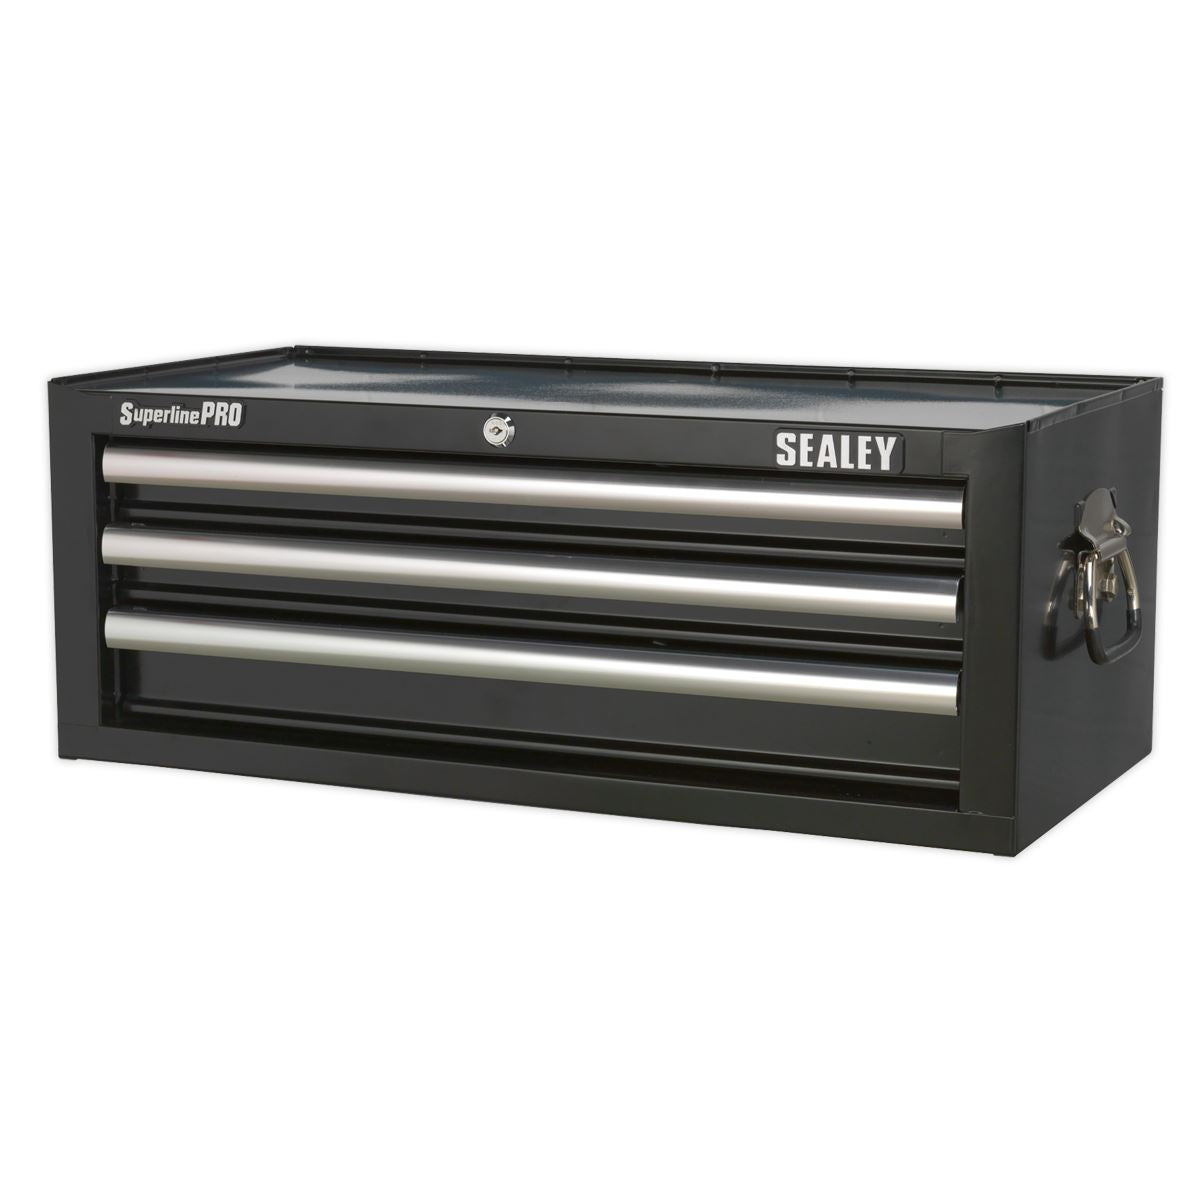 Sealey Superline Pro Mid-Box 3 Drawer with Ball-Bearing Slides - Black